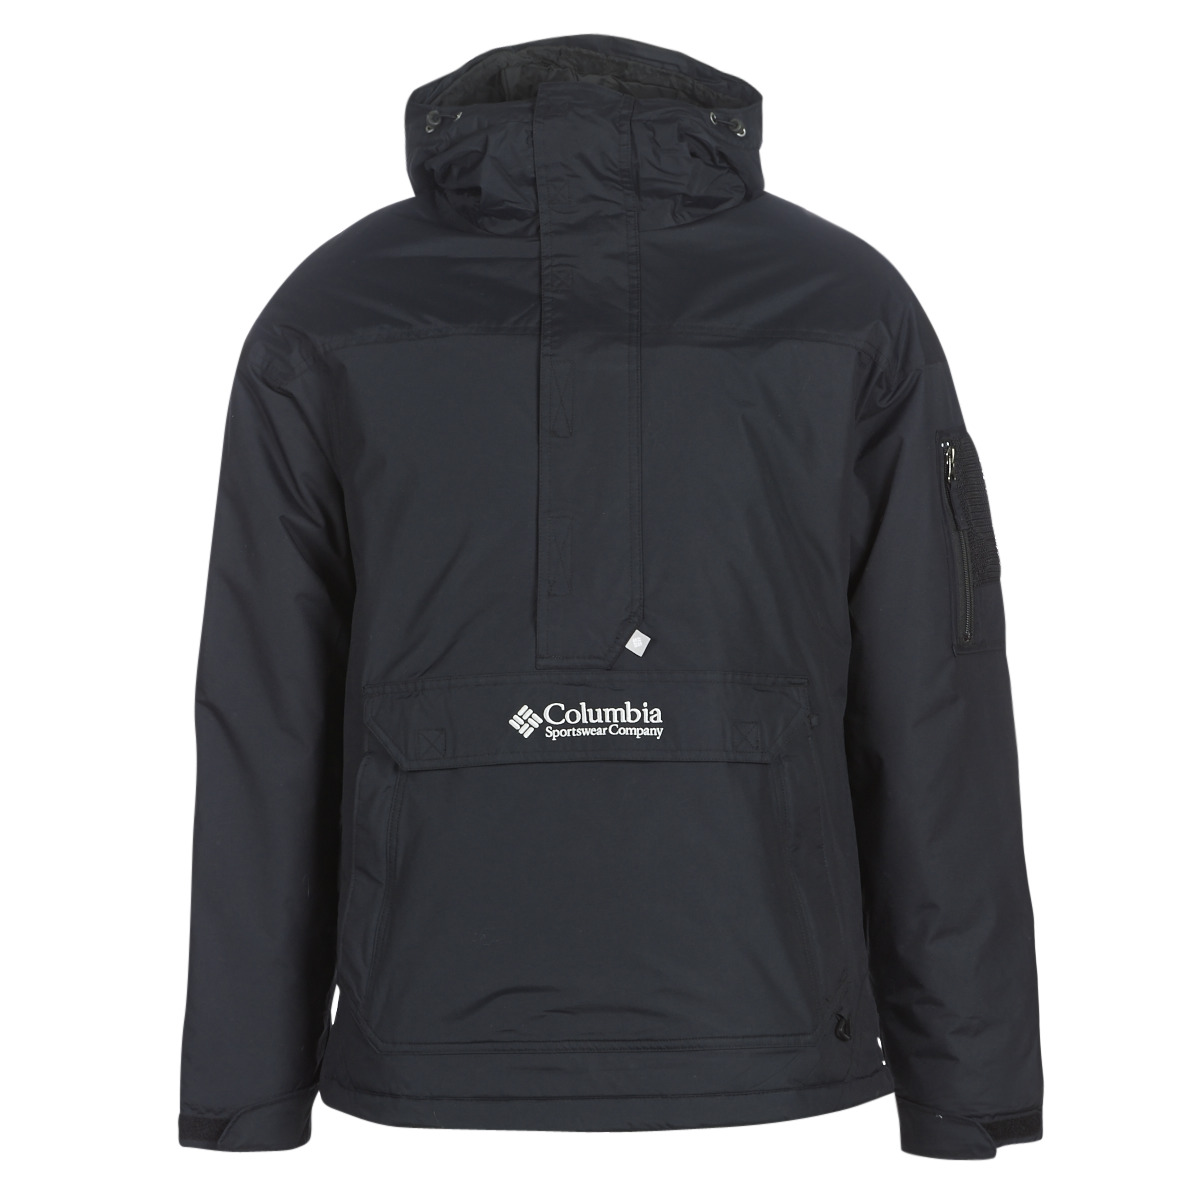 Samle cigar Specialist Columbia CHALLENGER PULLOVER Black - Free delivery | Spartoo NET ! -  Clothing Blouses Men USD/$140.80